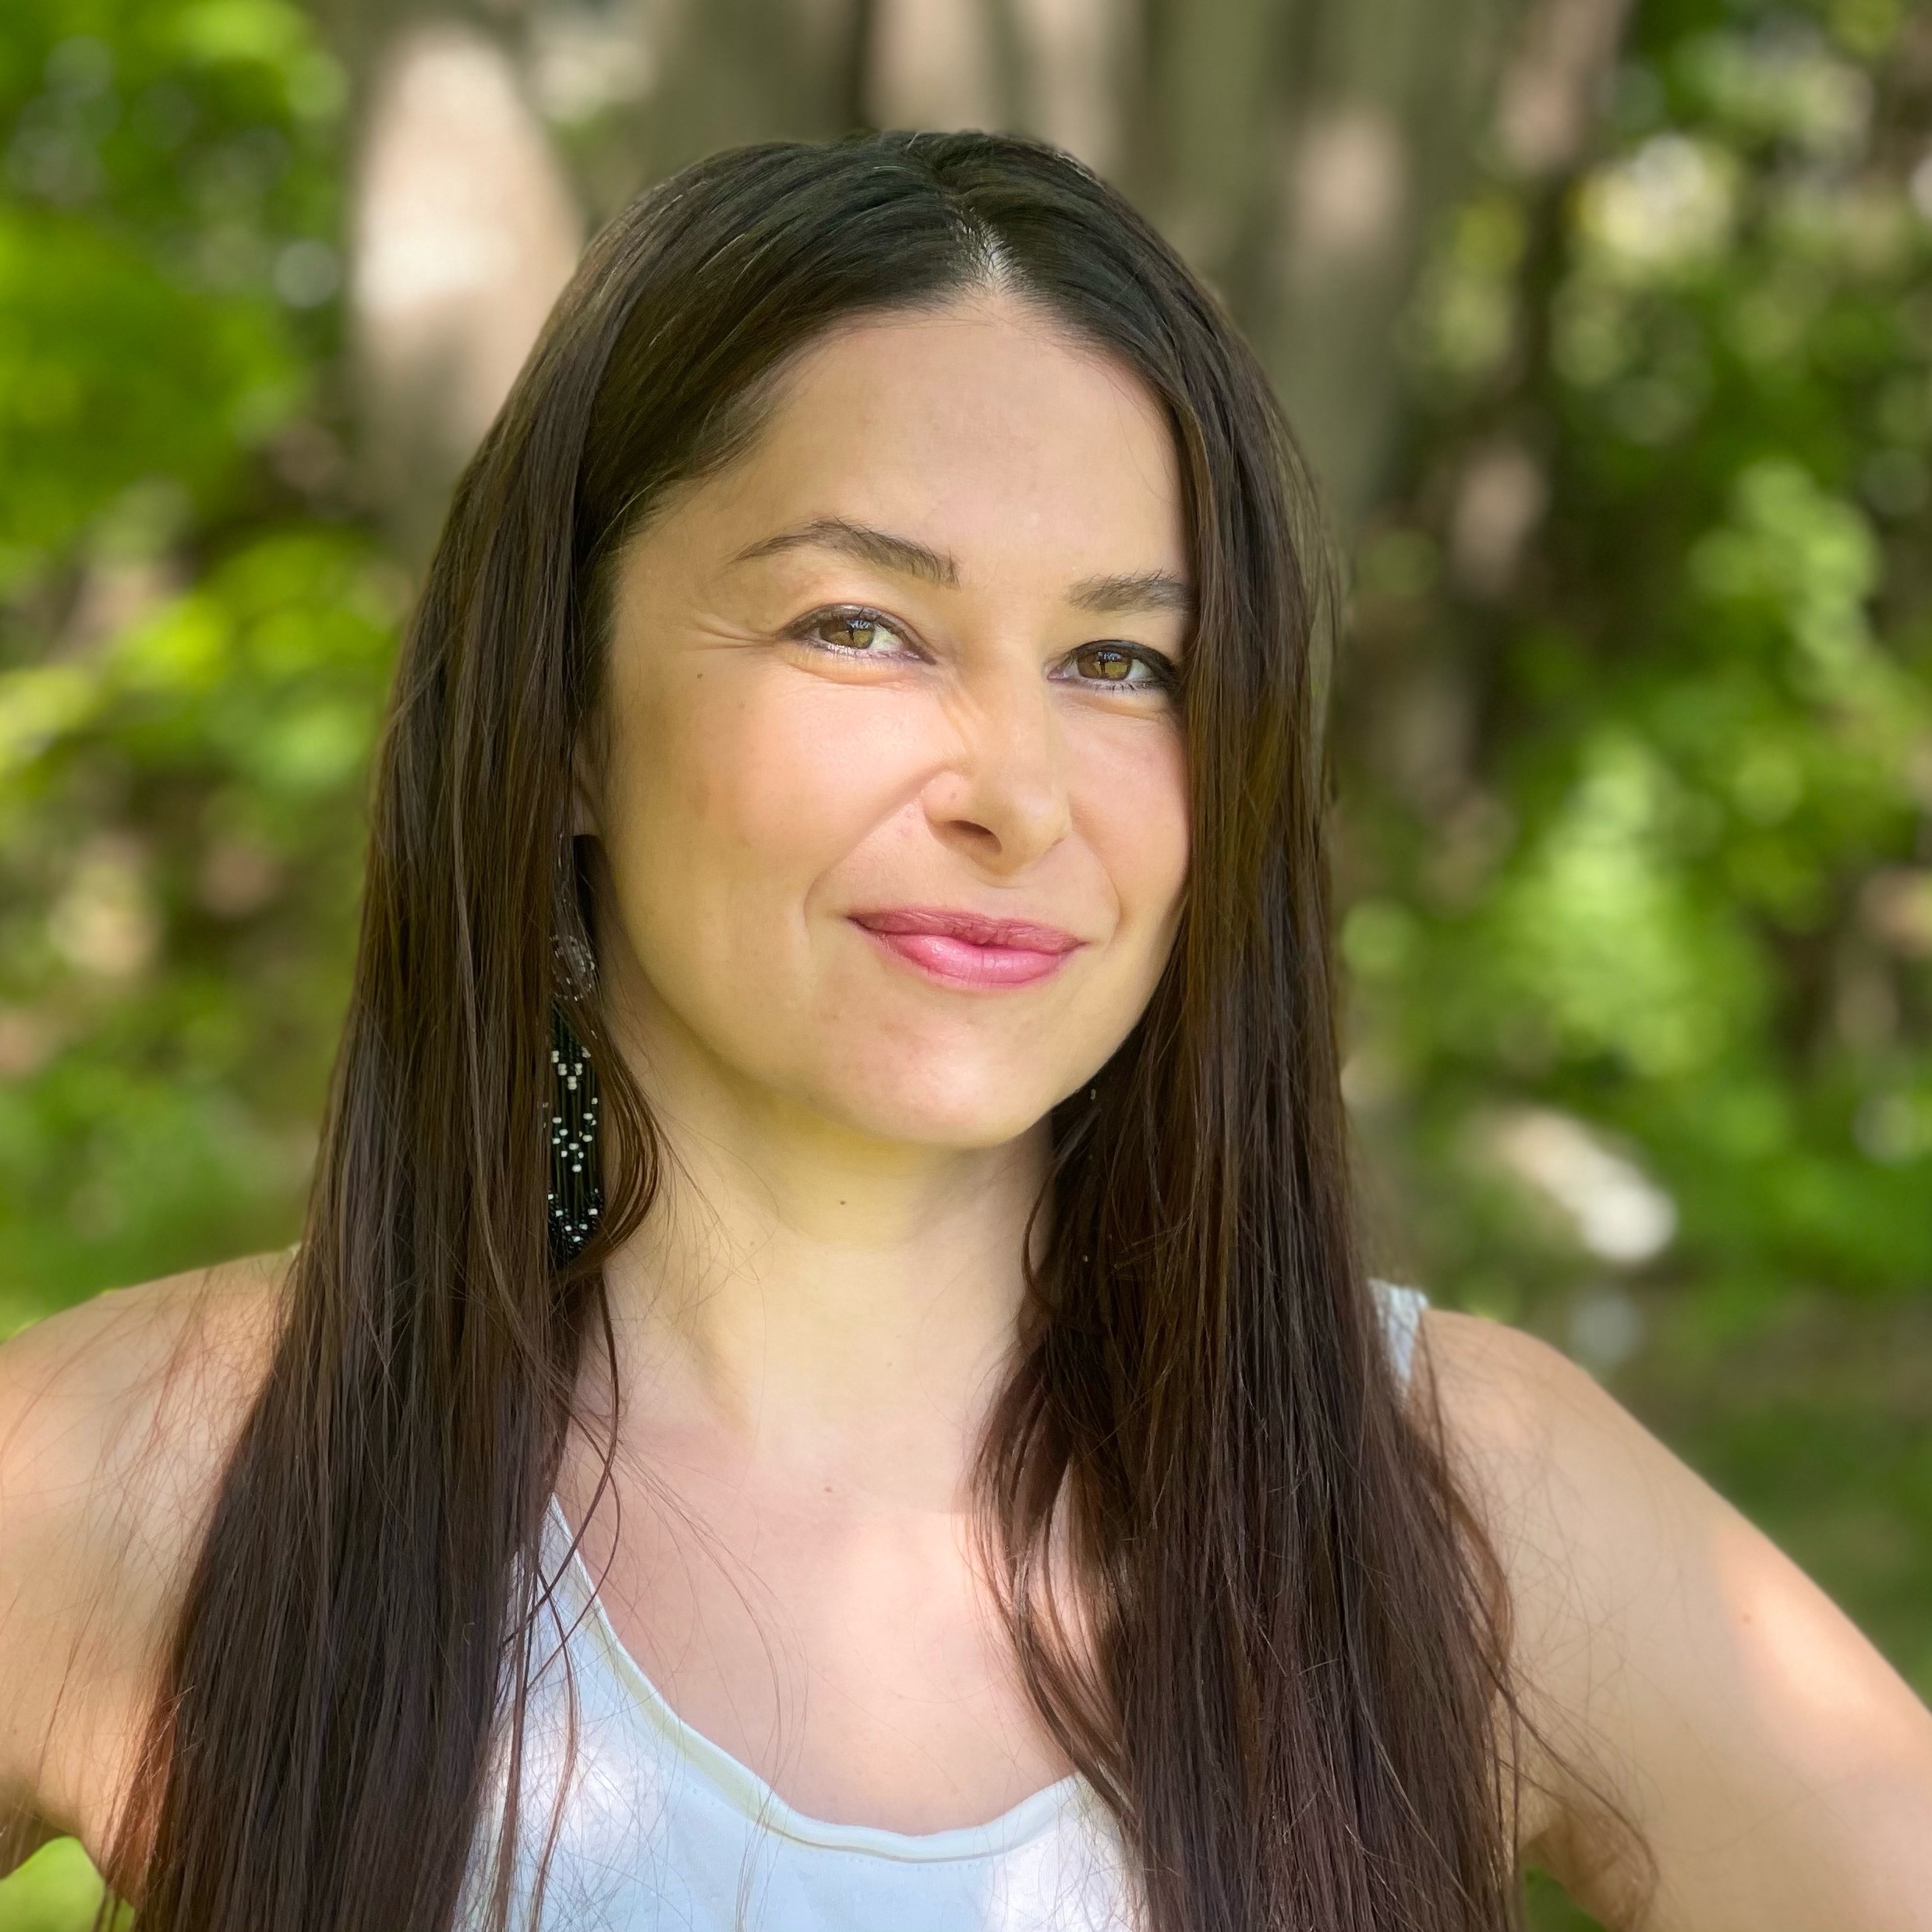 A metis woman standing outside with green leaves behind her. She is wearing a blue tank top and her long brown hair is down. She has a small smile and pink lips.